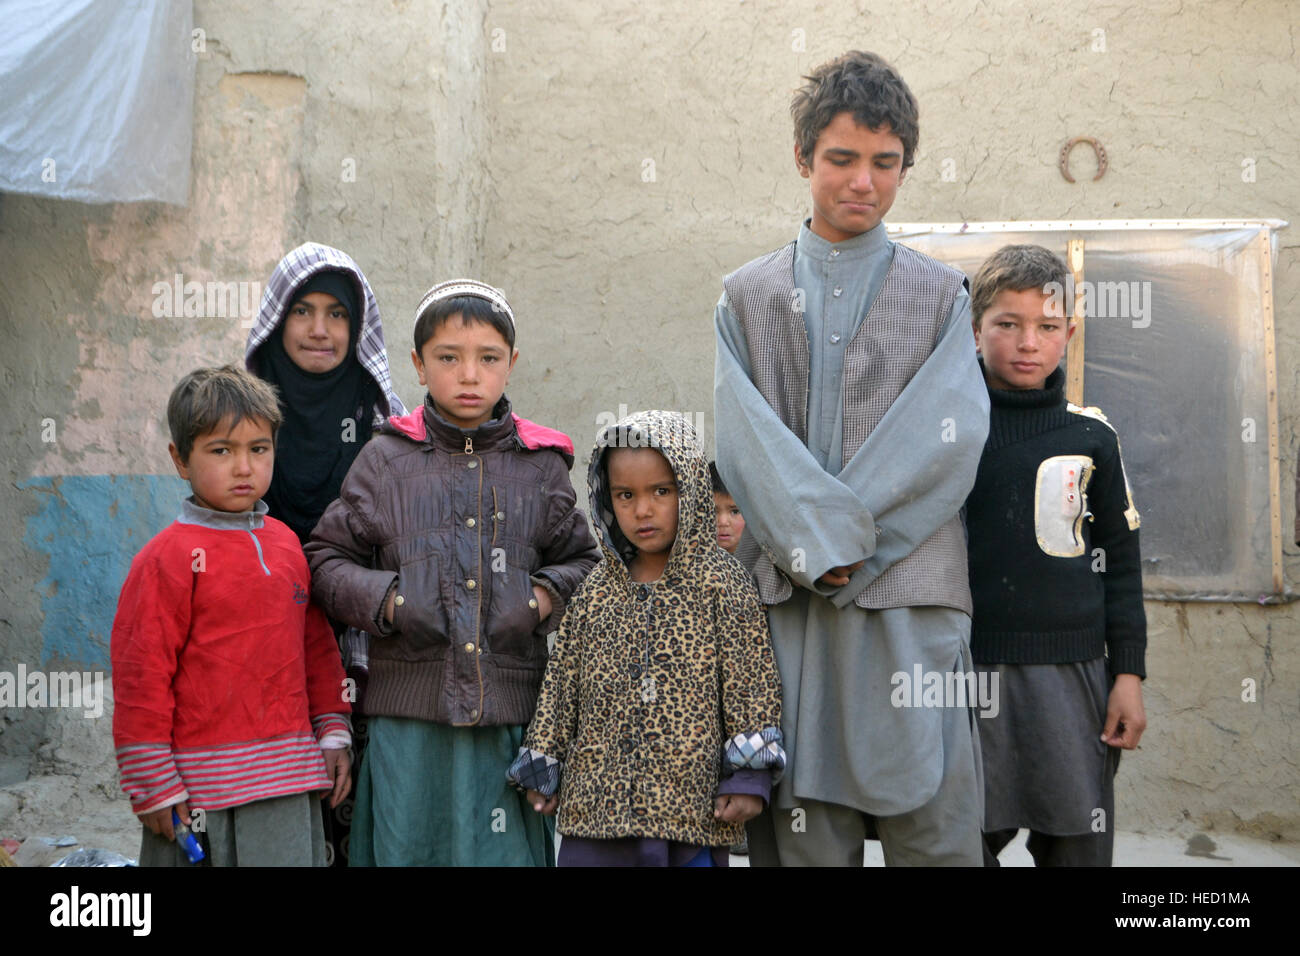 Six of Sang Bibi's children in the courtyard of her rented mud hut in the small internally displayed persons camp where she lives with a family of 9, on the outskirts of Kabul city, Afghanistan, 20 December 2016. She had to flee Kunduz after her 5-year-old daughter and husband were killed when a mortar landed on her house. Around 580,000 people have been displaced due to conflict related violence in 2016 alone, surprising the Afghan government and international community alike. Photo: Mohammad Jawad/dpa Stock Photo